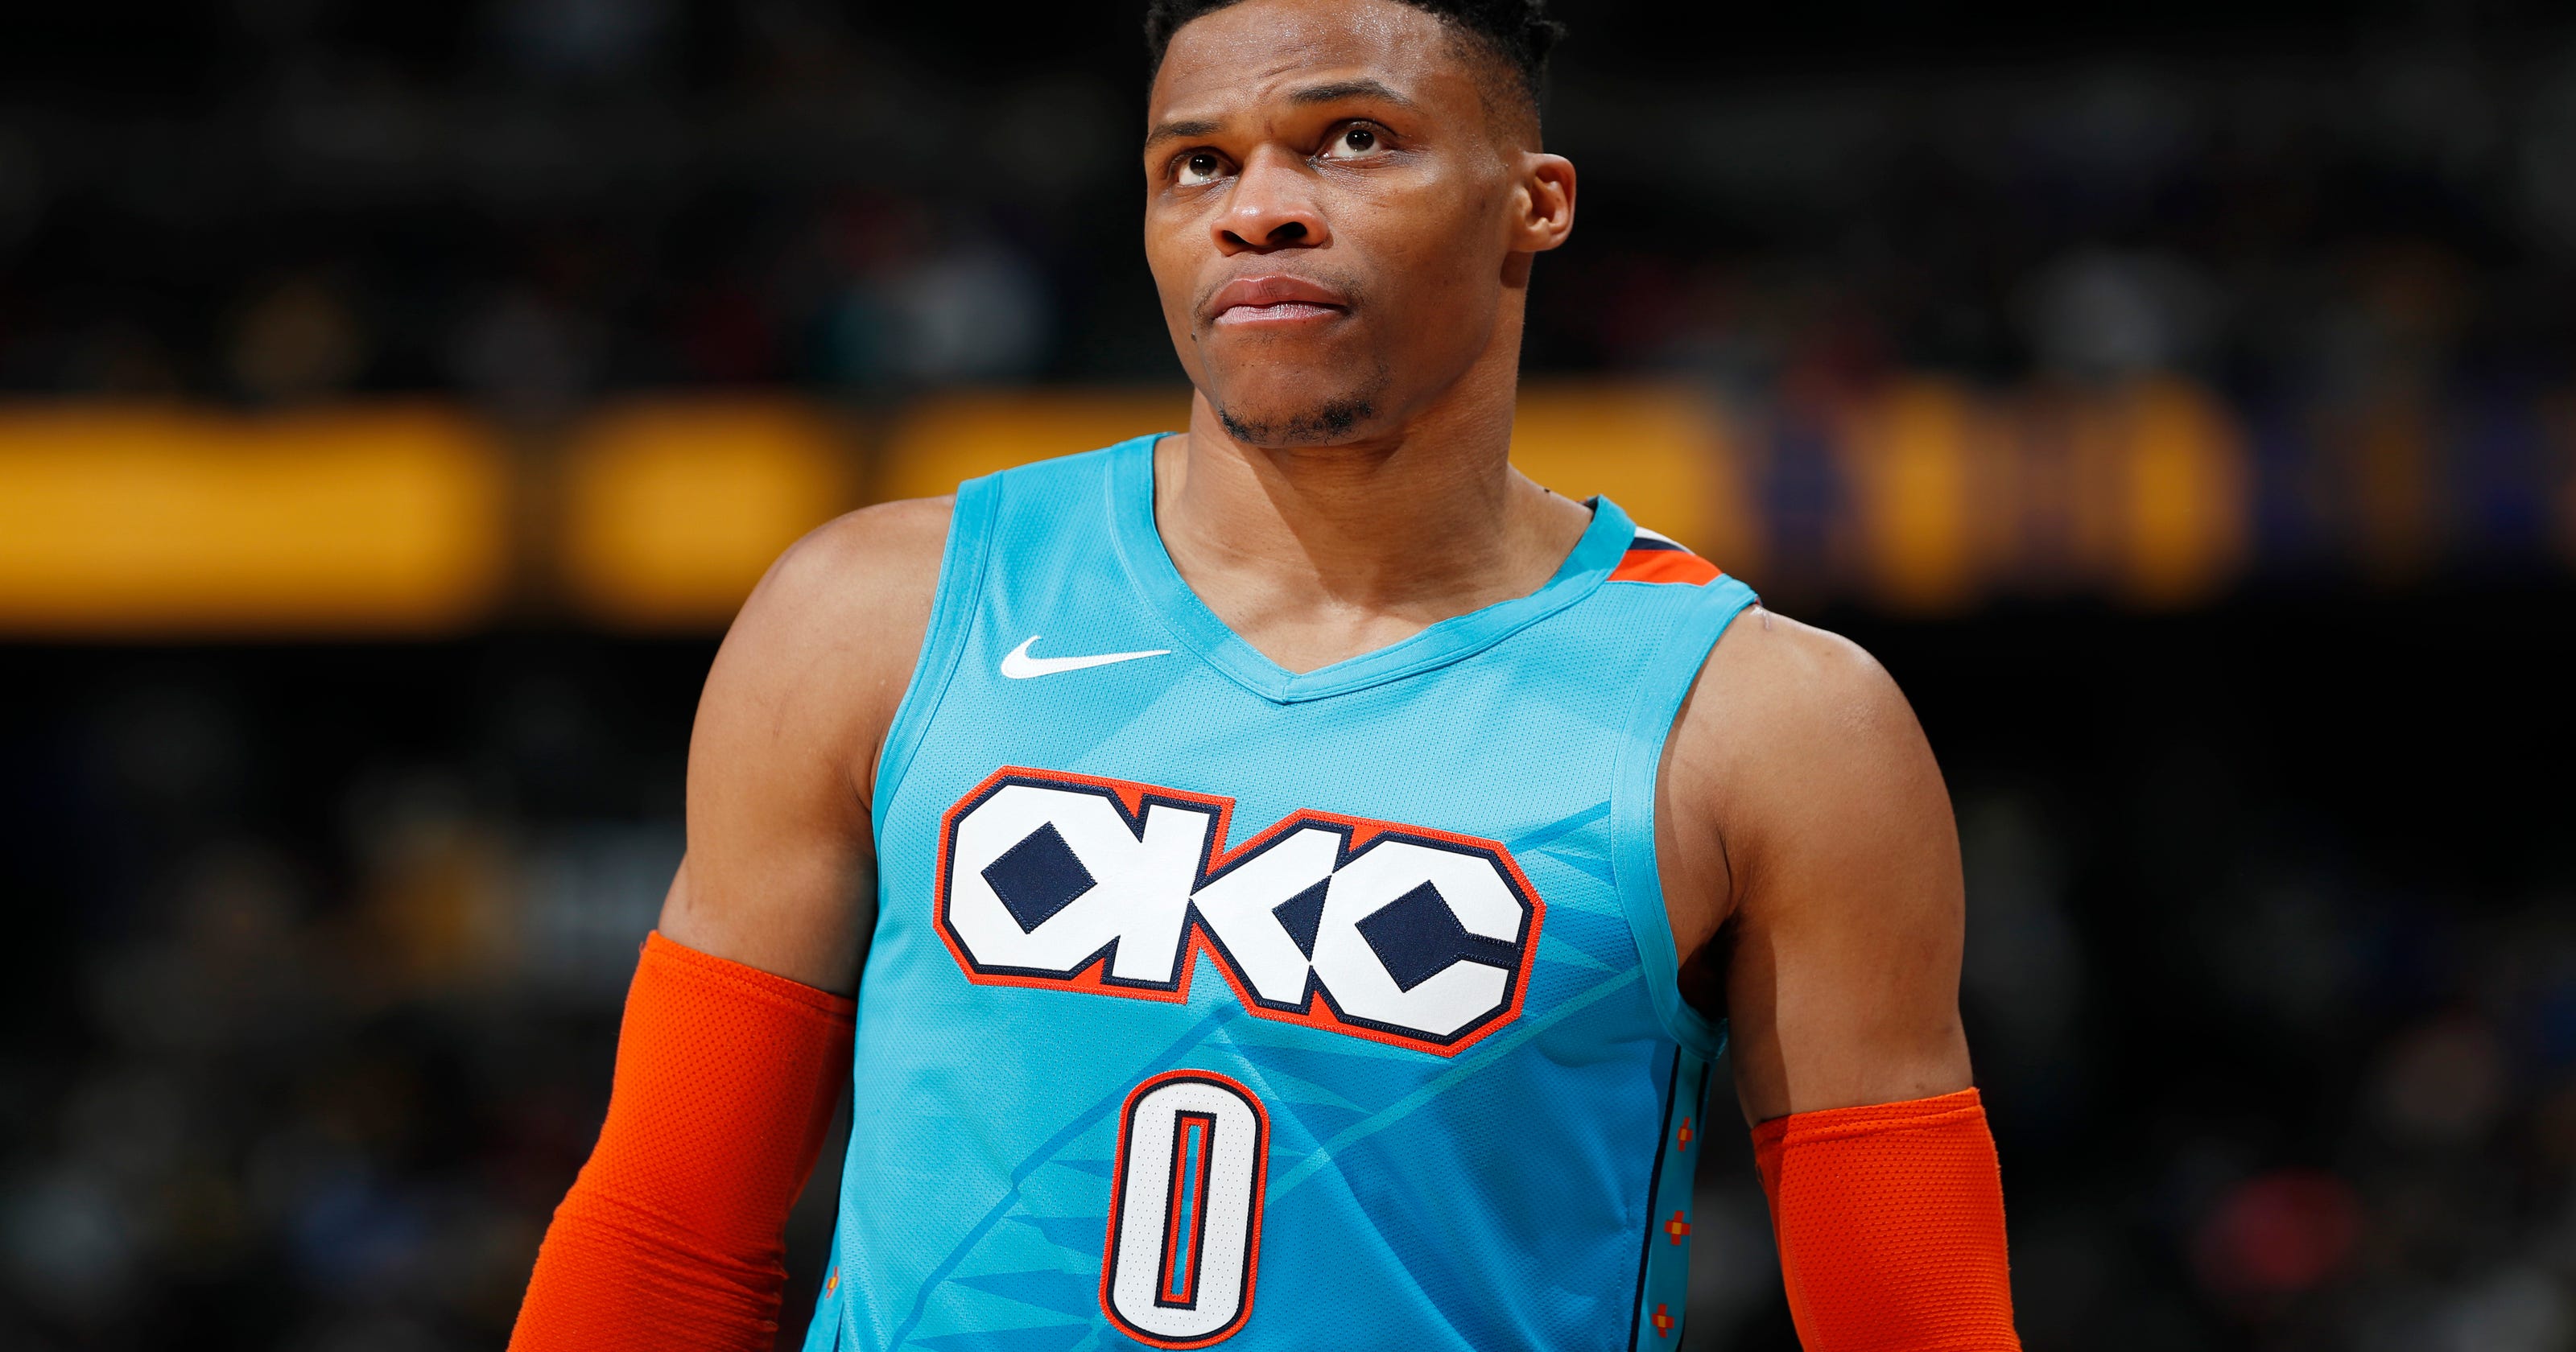 Russell Westbrook shoved by fan during Thunder - Nuggets